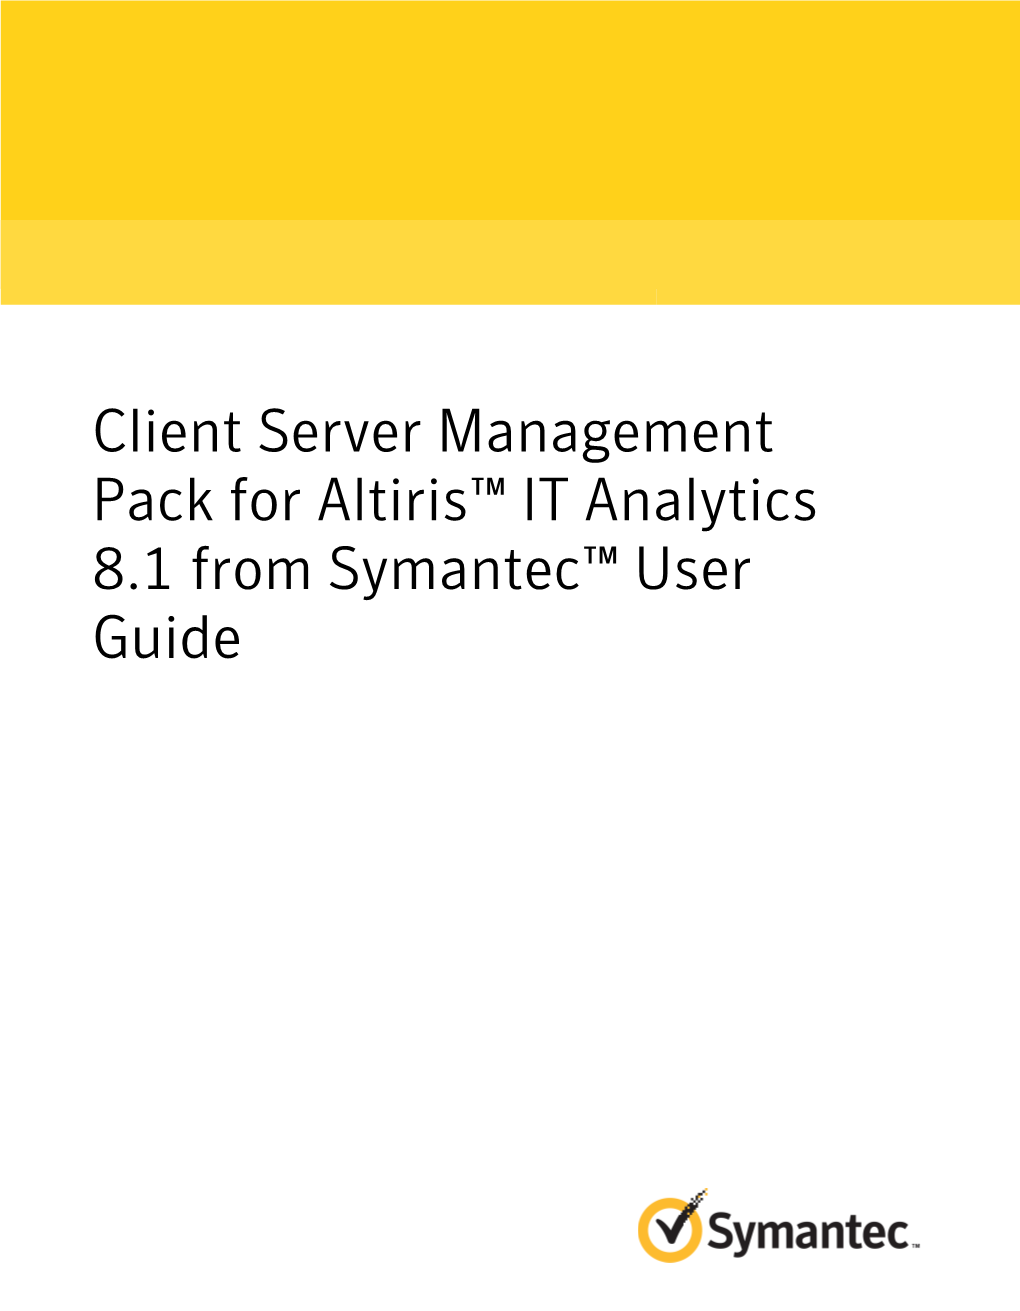 Client Server Management Pack for Altiris™ IT Analytics 8.1 From